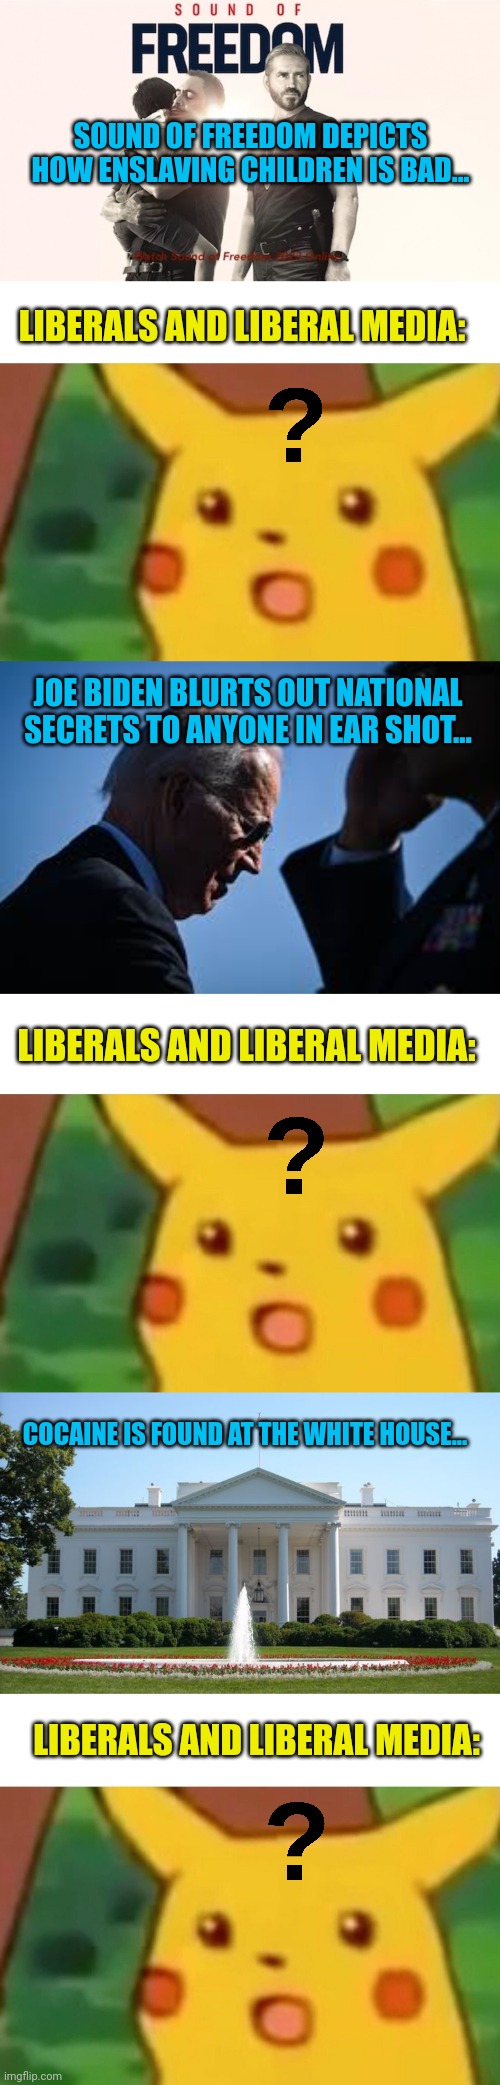 Anyone else notice a pattern of "ignorance is bliss" | SOUND OF FREEDOM DEPICTS HOW ENSLAVING CHILDREN IS BAD... LIBERALS AND LIBERAL MEDIA:; JOE BIDEN BLURTS OUT NATIONAL SECRETS TO ANYONE IN EAR SHOT... LIBERALS AND LIBERAL MEDIA:; COCAINE IS FOUND AT THE WHITE HOUSE... LIBERALS AND LIBERAL MEDIA: | image tagged in memes,surprised pikachu,white house | made w/ Imgflip meme maker